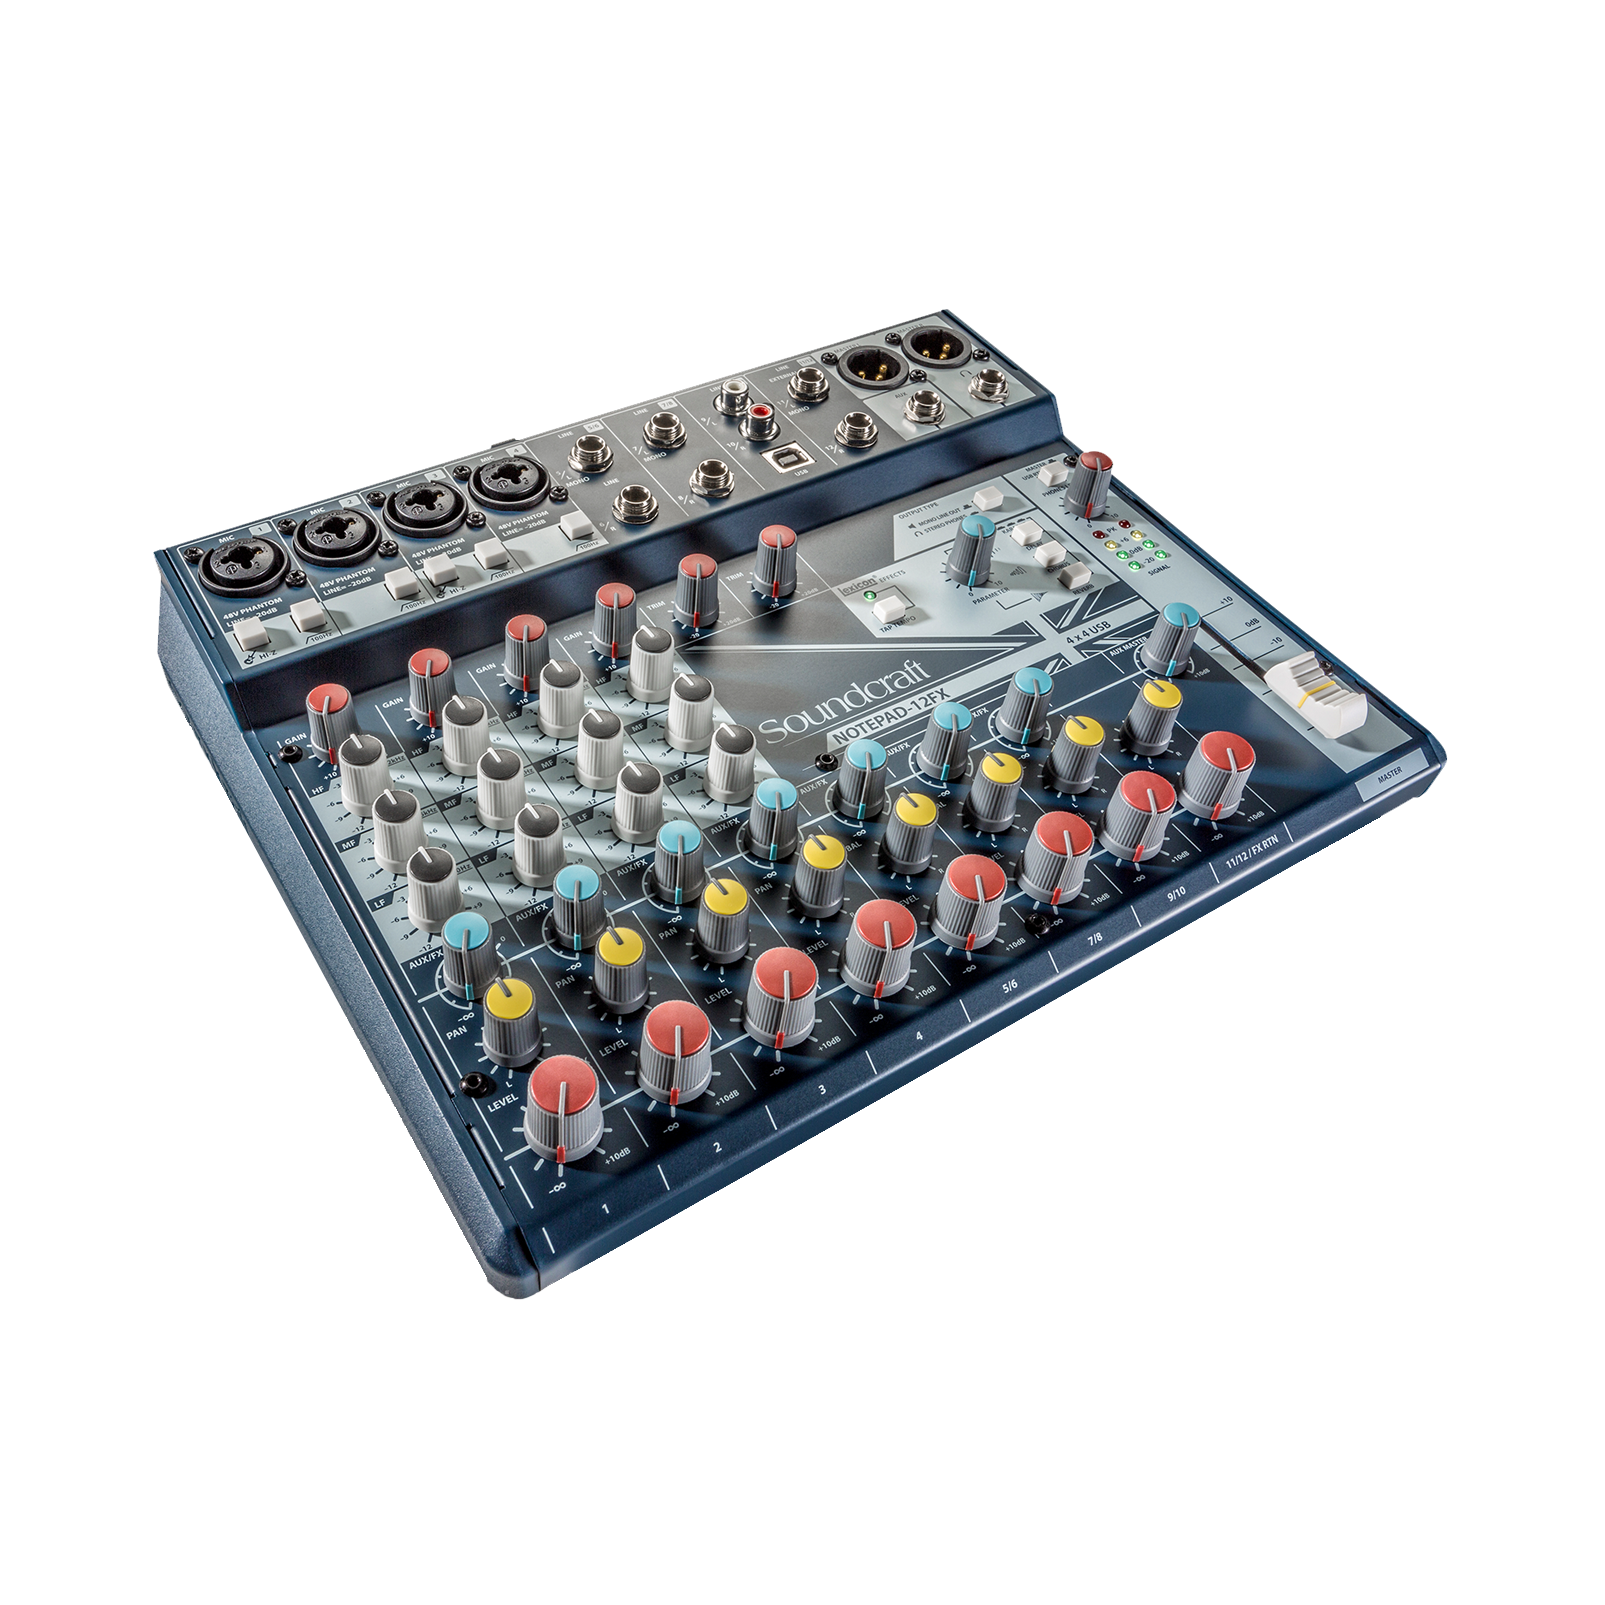 Notepad-12FX - Dark Blue - Small-format analog mixing console with USB I/O and Lexicon effects - Detailshot 2